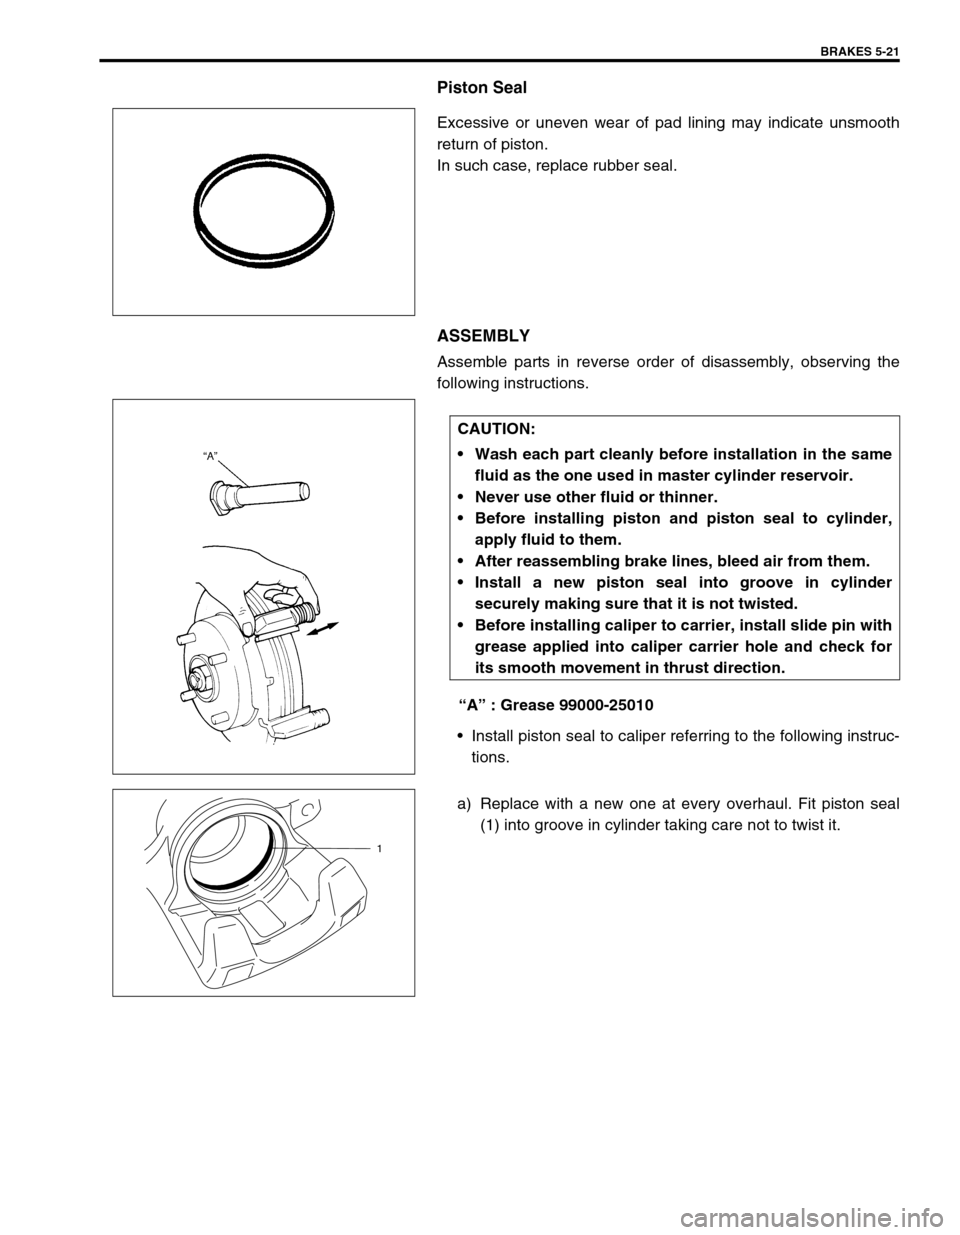 SUZUKI SWIFT 2000 1.G RG413 Service Owners Manual BRAKES 5-21
Piston Seal
Excessive or uneven wear of pad lining may indicate unsmooth
return of piston. 
In such case, replace rubber seal.
ASSEMBLY
Assemble parts in reverse order of disassembly, obse